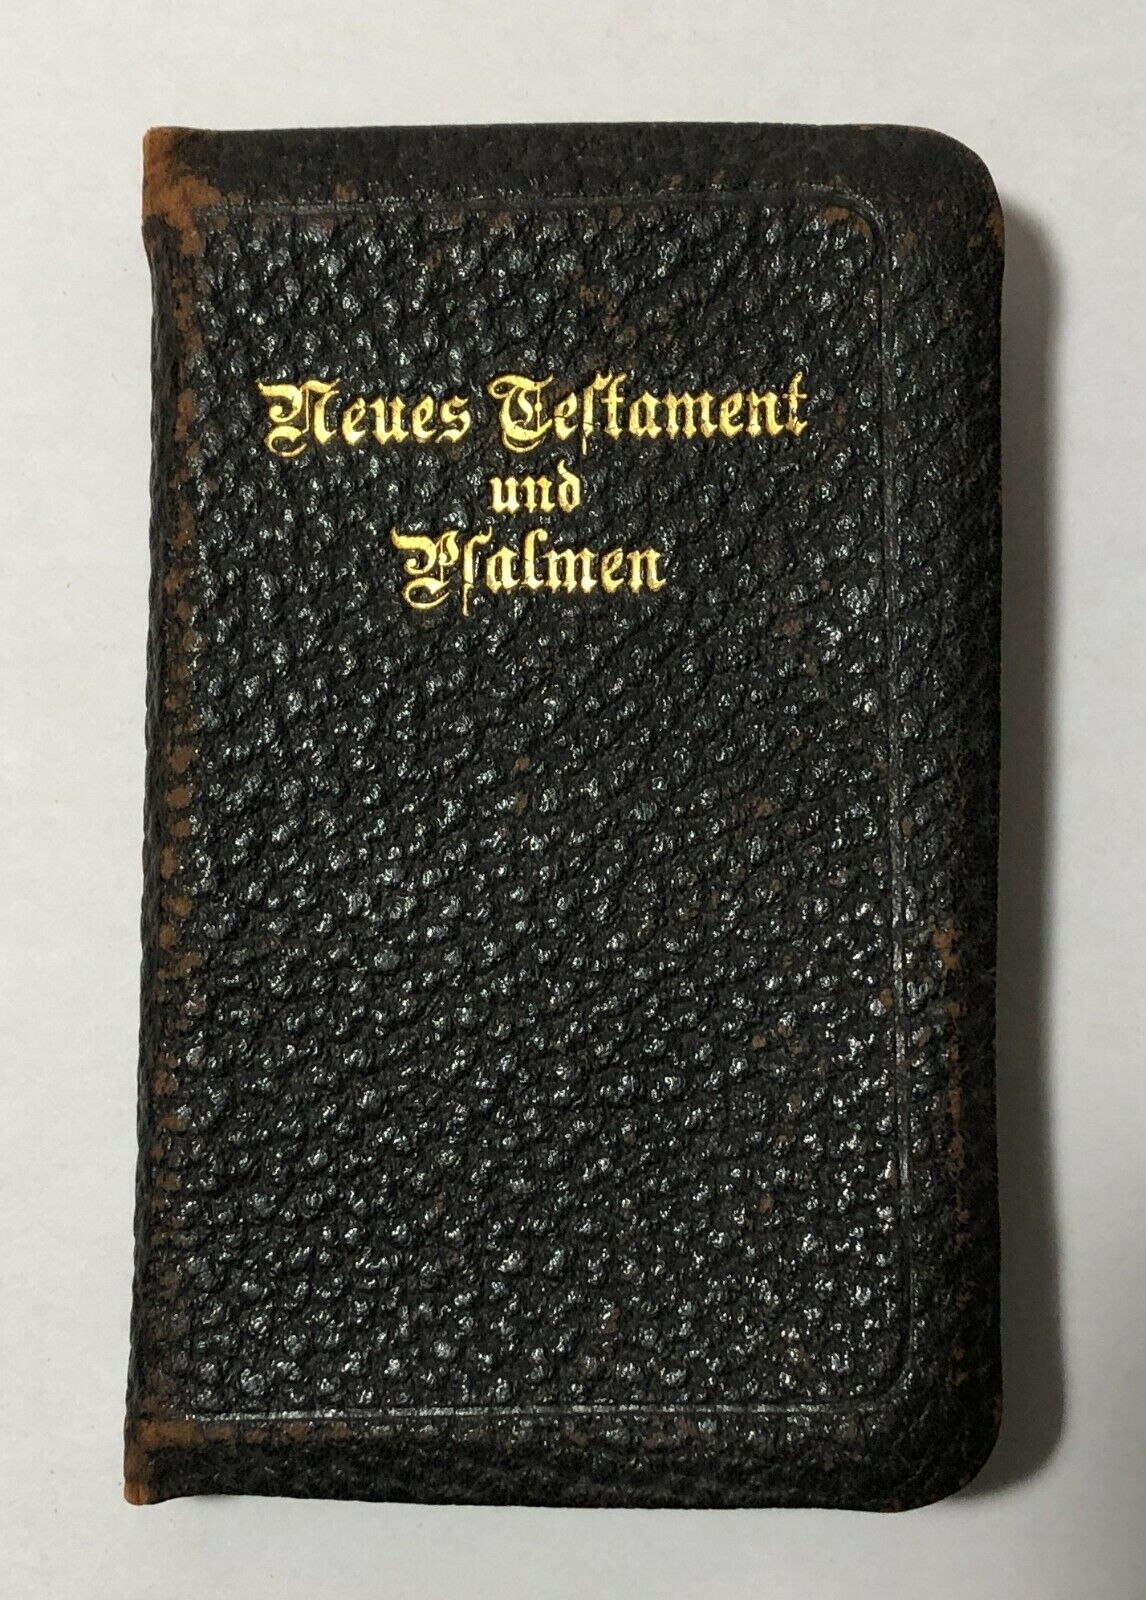 1920s The New Testament and Psalms by Dr. Martin Luther Wartburg Edition